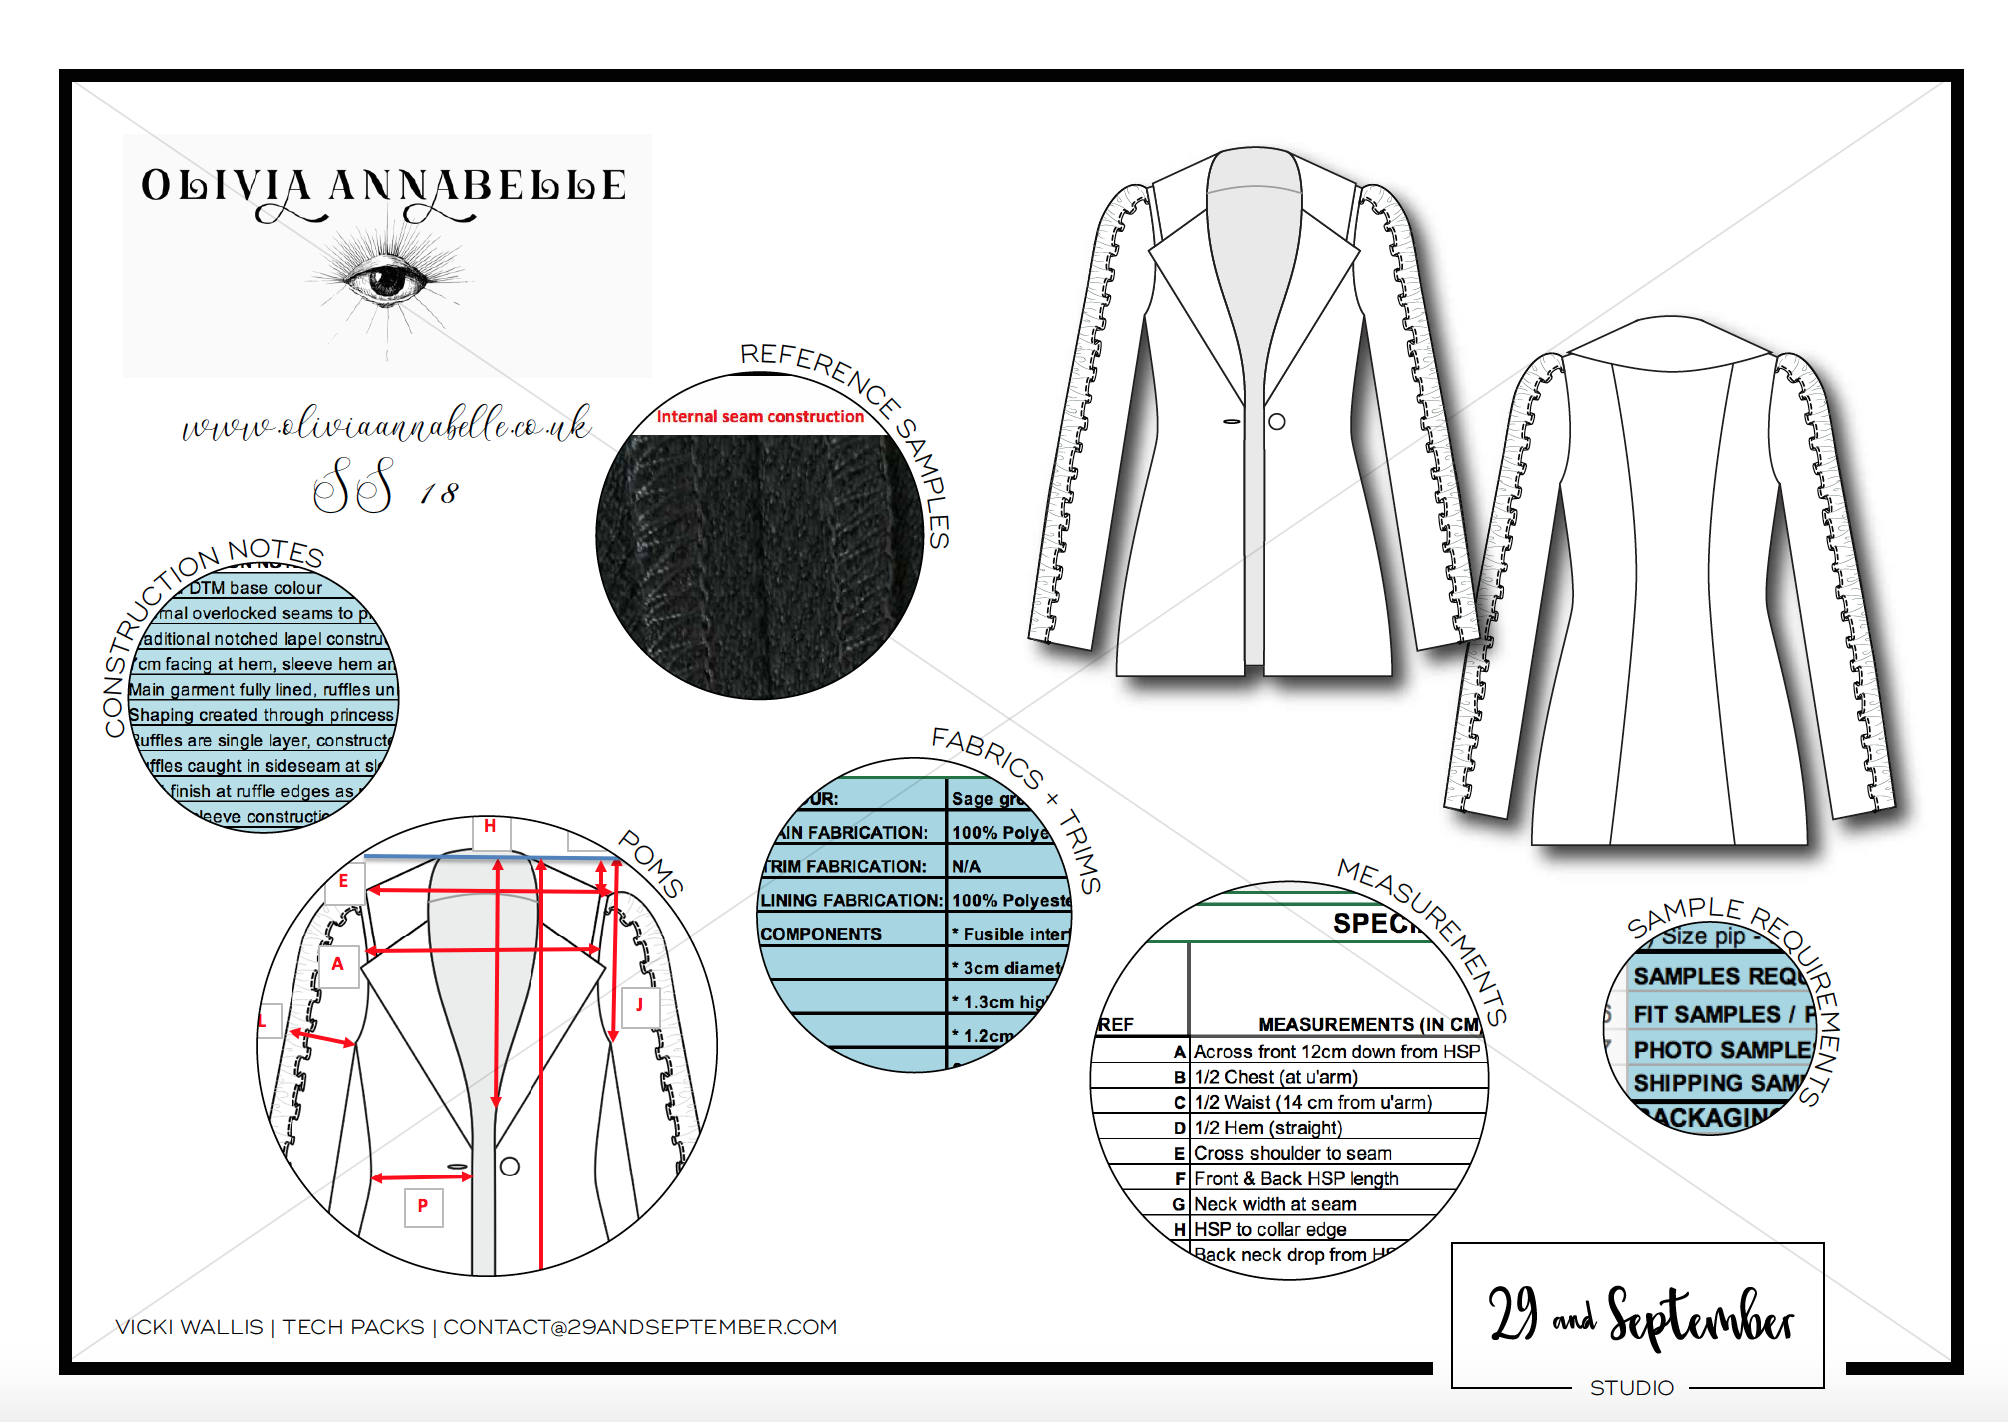 29andSeptember Studio Fashion Technical Drawings and Tech Pack Portfolio